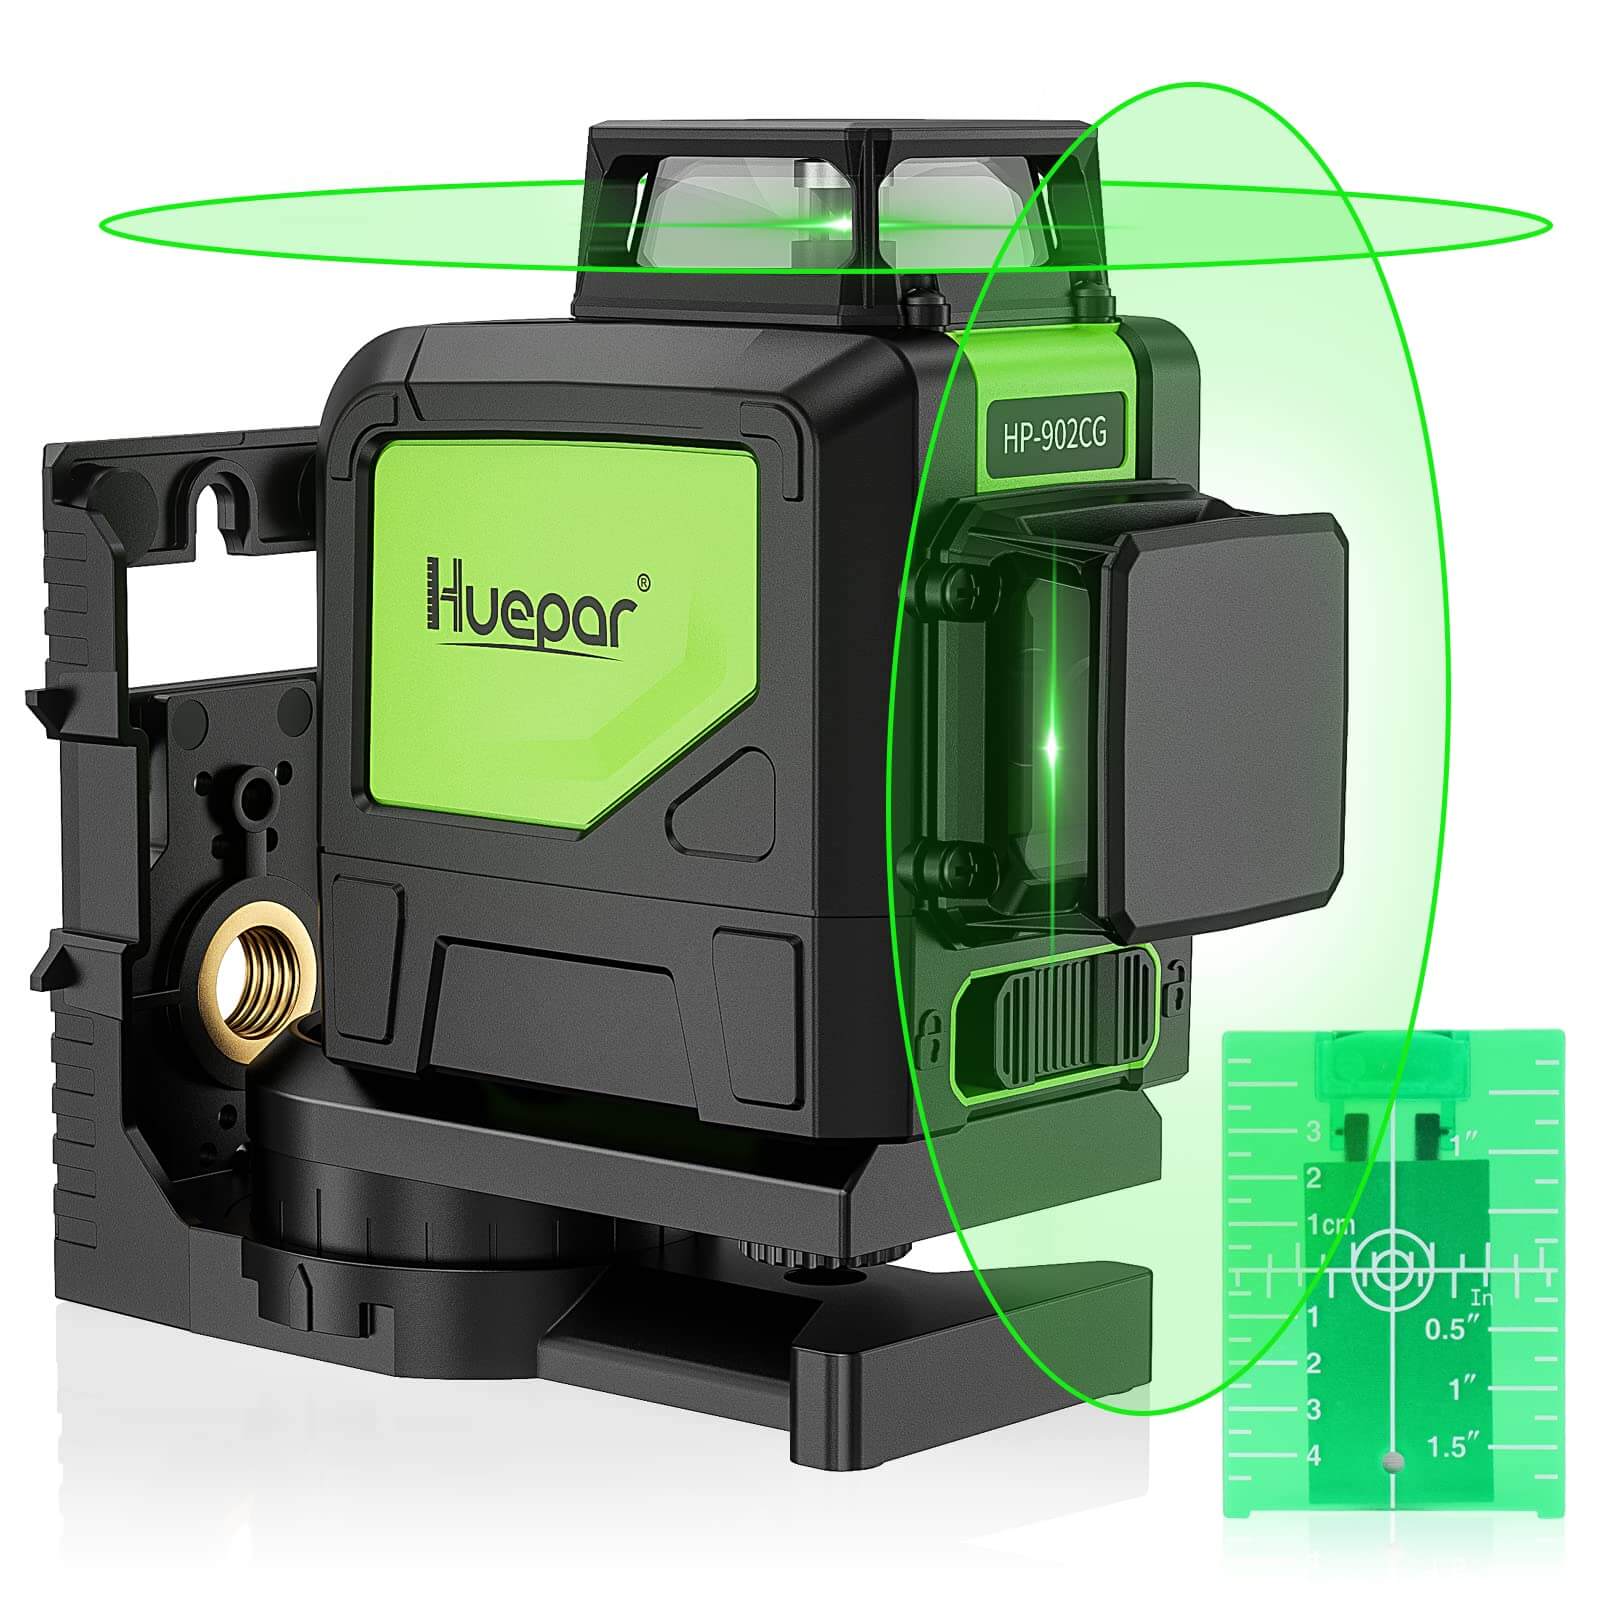 Huepar 902CG - Self-Leveling 360-Degree Cross Line Laser Level with Pulse Mode and Magnetic Pivoting Base